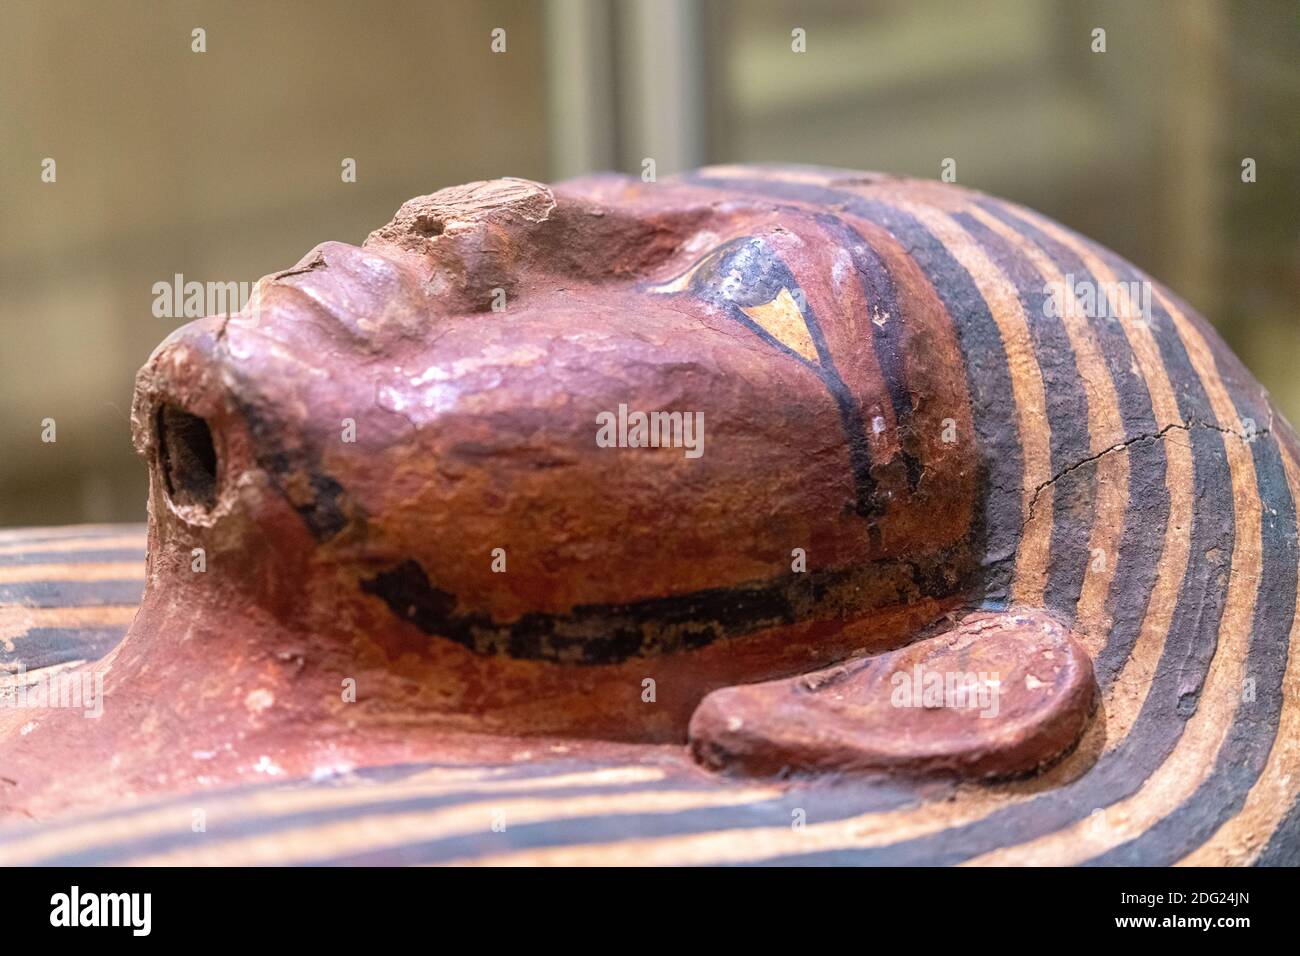 Mummy-case of Djedmaatesankh. The item is seen in the Royal Ontario Museum exhibit named 'Egyptian Mummies: Ancient Lives. New Discoveries' Stock Photo